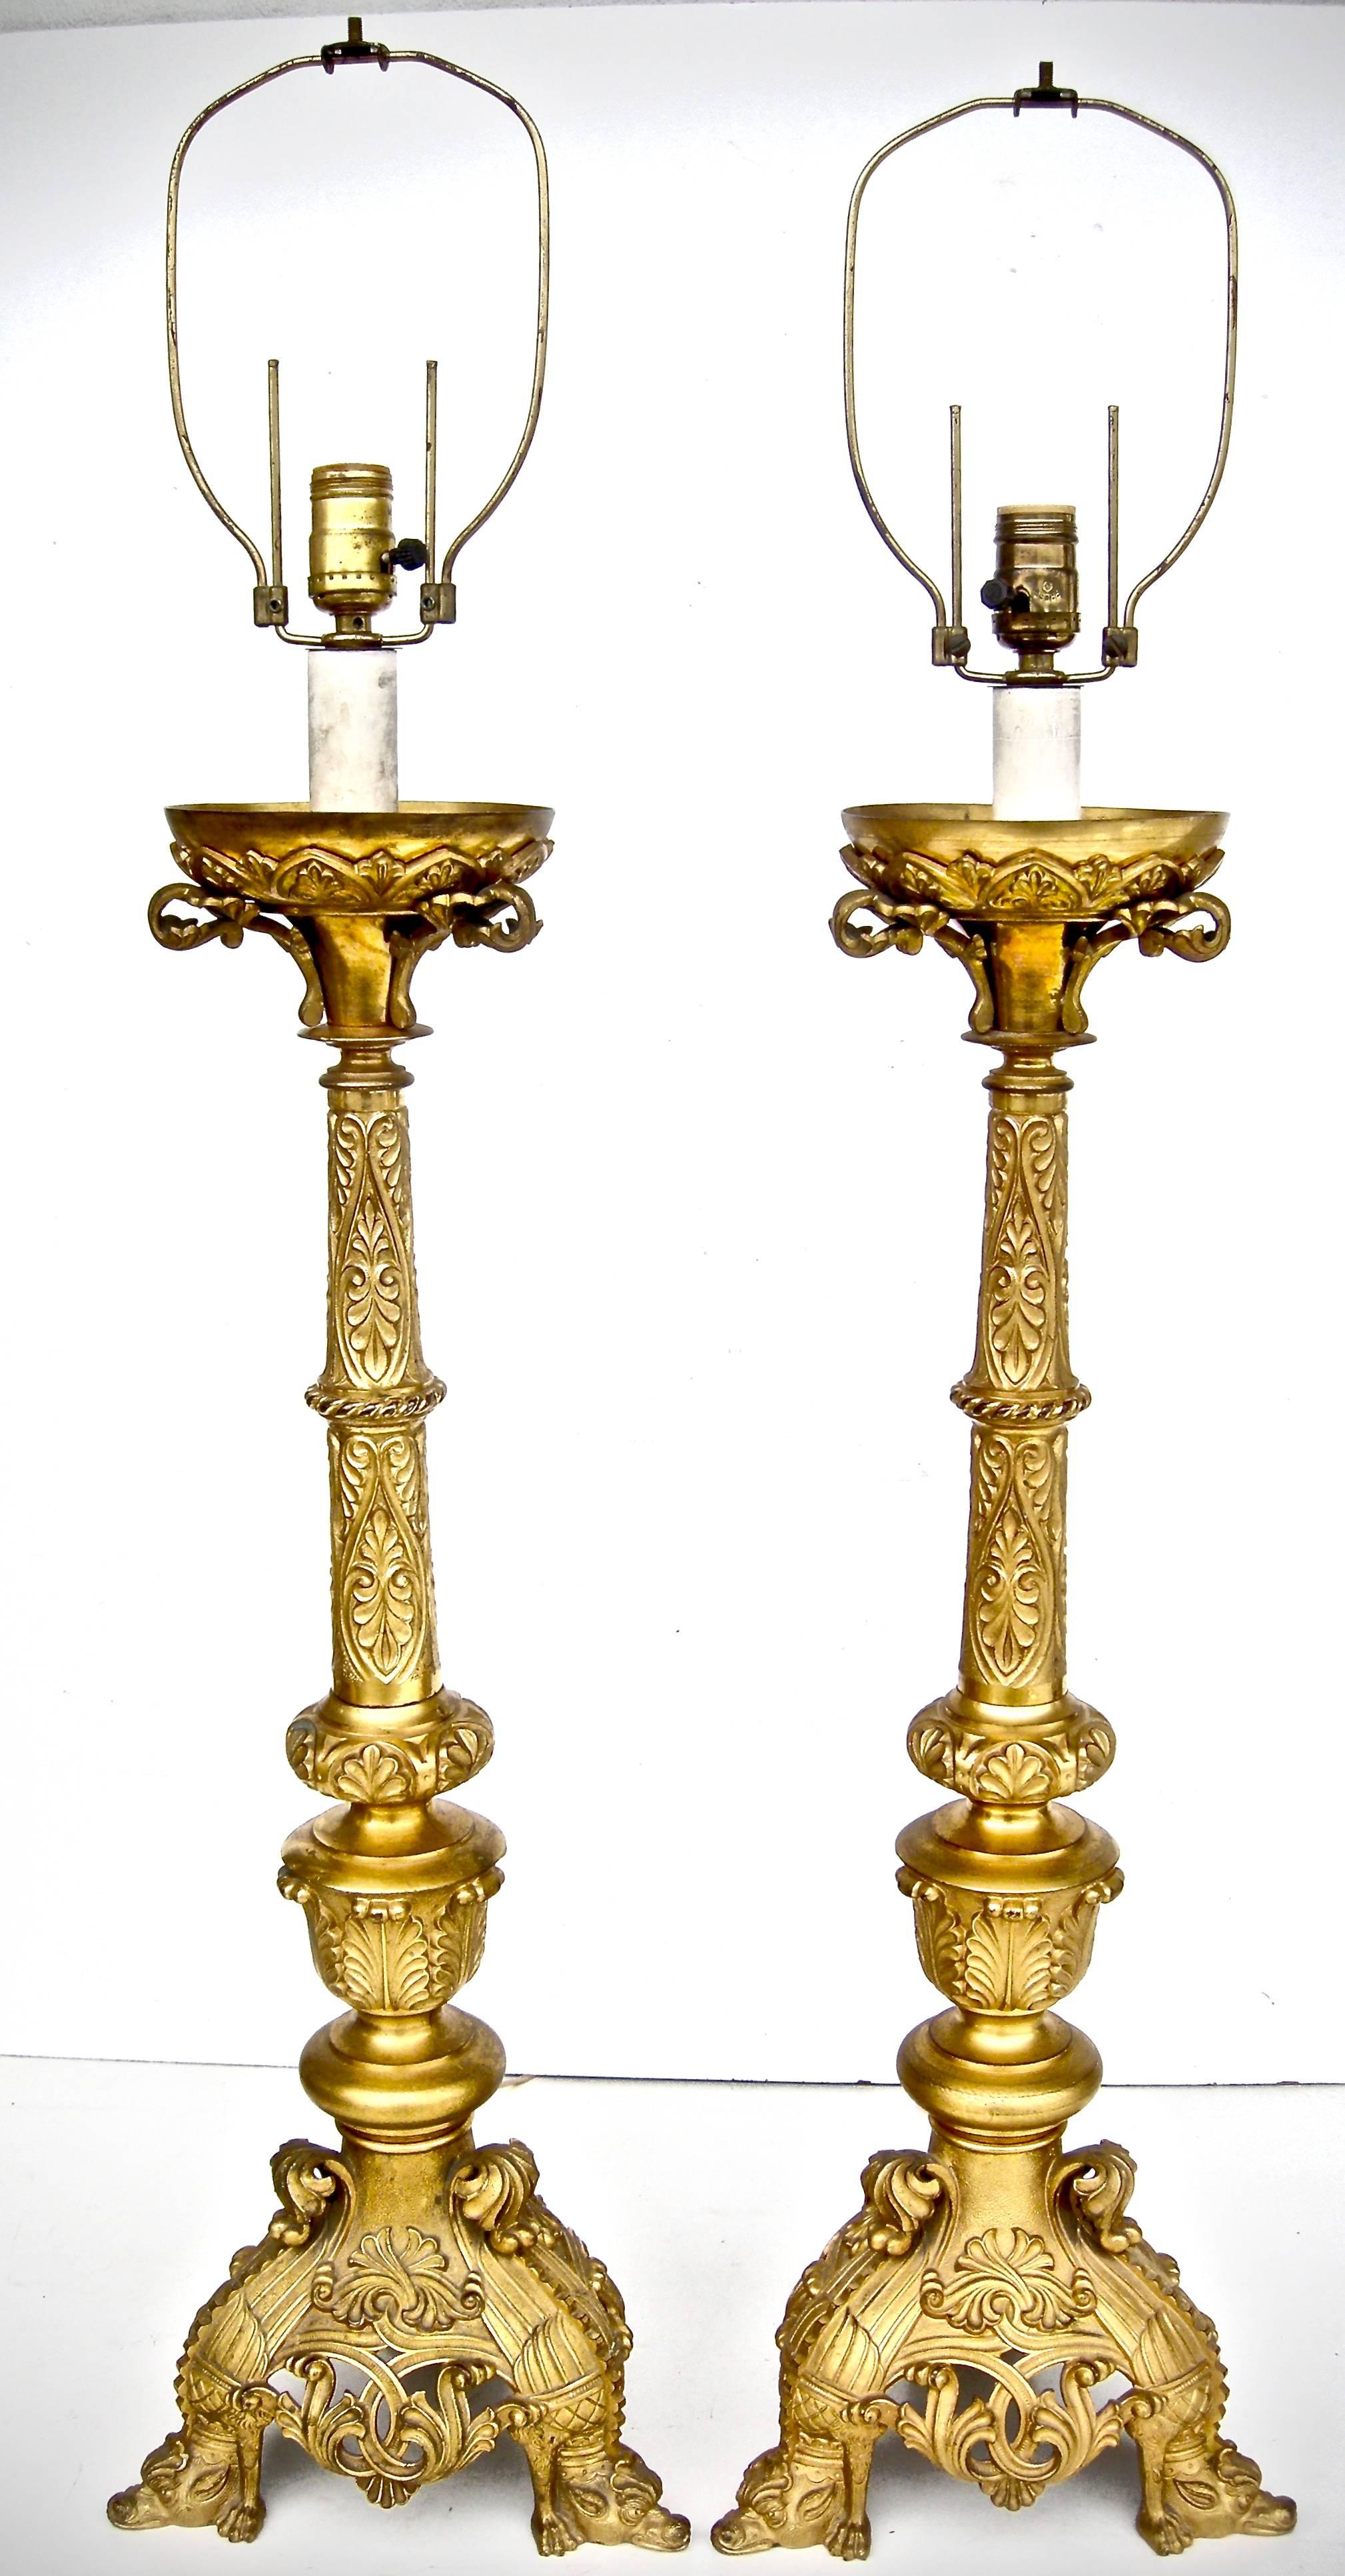 Elegant pair of, early French, over-scale, gilt bronze pillar lights. Rococo-style, having top bowl bobeches supported by highly detailed and ornately embossed, foliate-style, scrolled columns. Reticulated and flowing scrollwork bases accented with